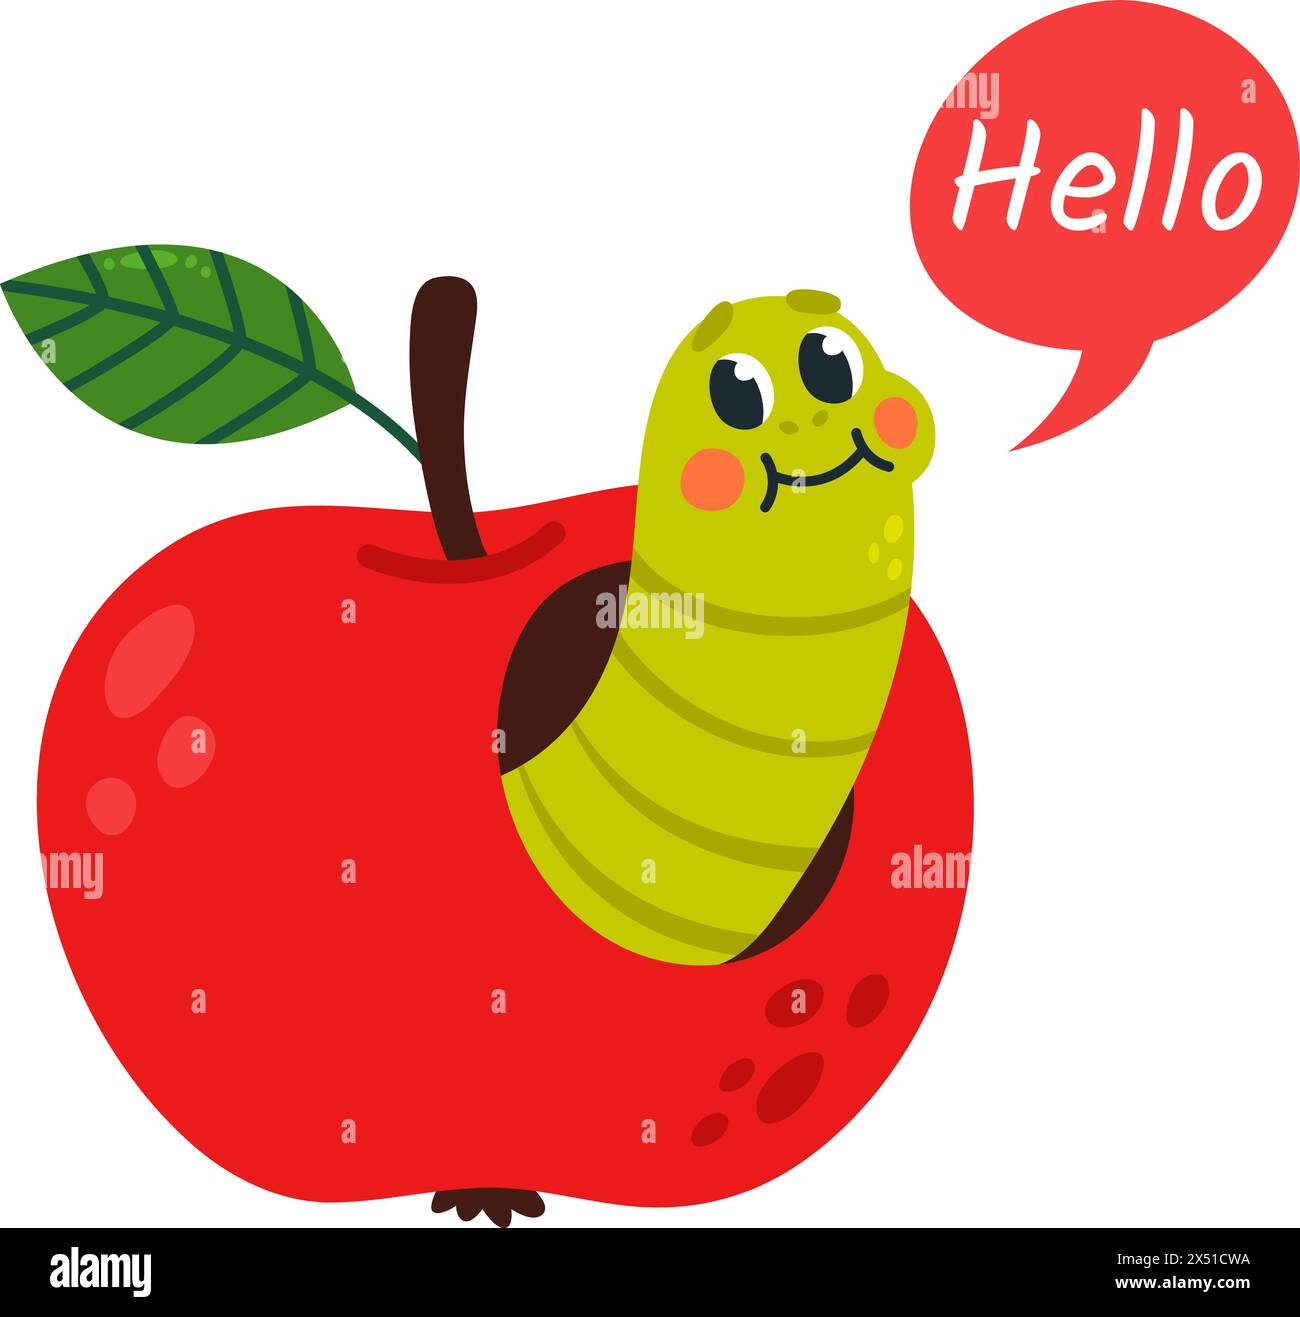 Worm and apple. Cartoon funny crawler looks out red fruit and say hello. Cute nature print or sticker design, children mascot, classy vector character Stock Vector